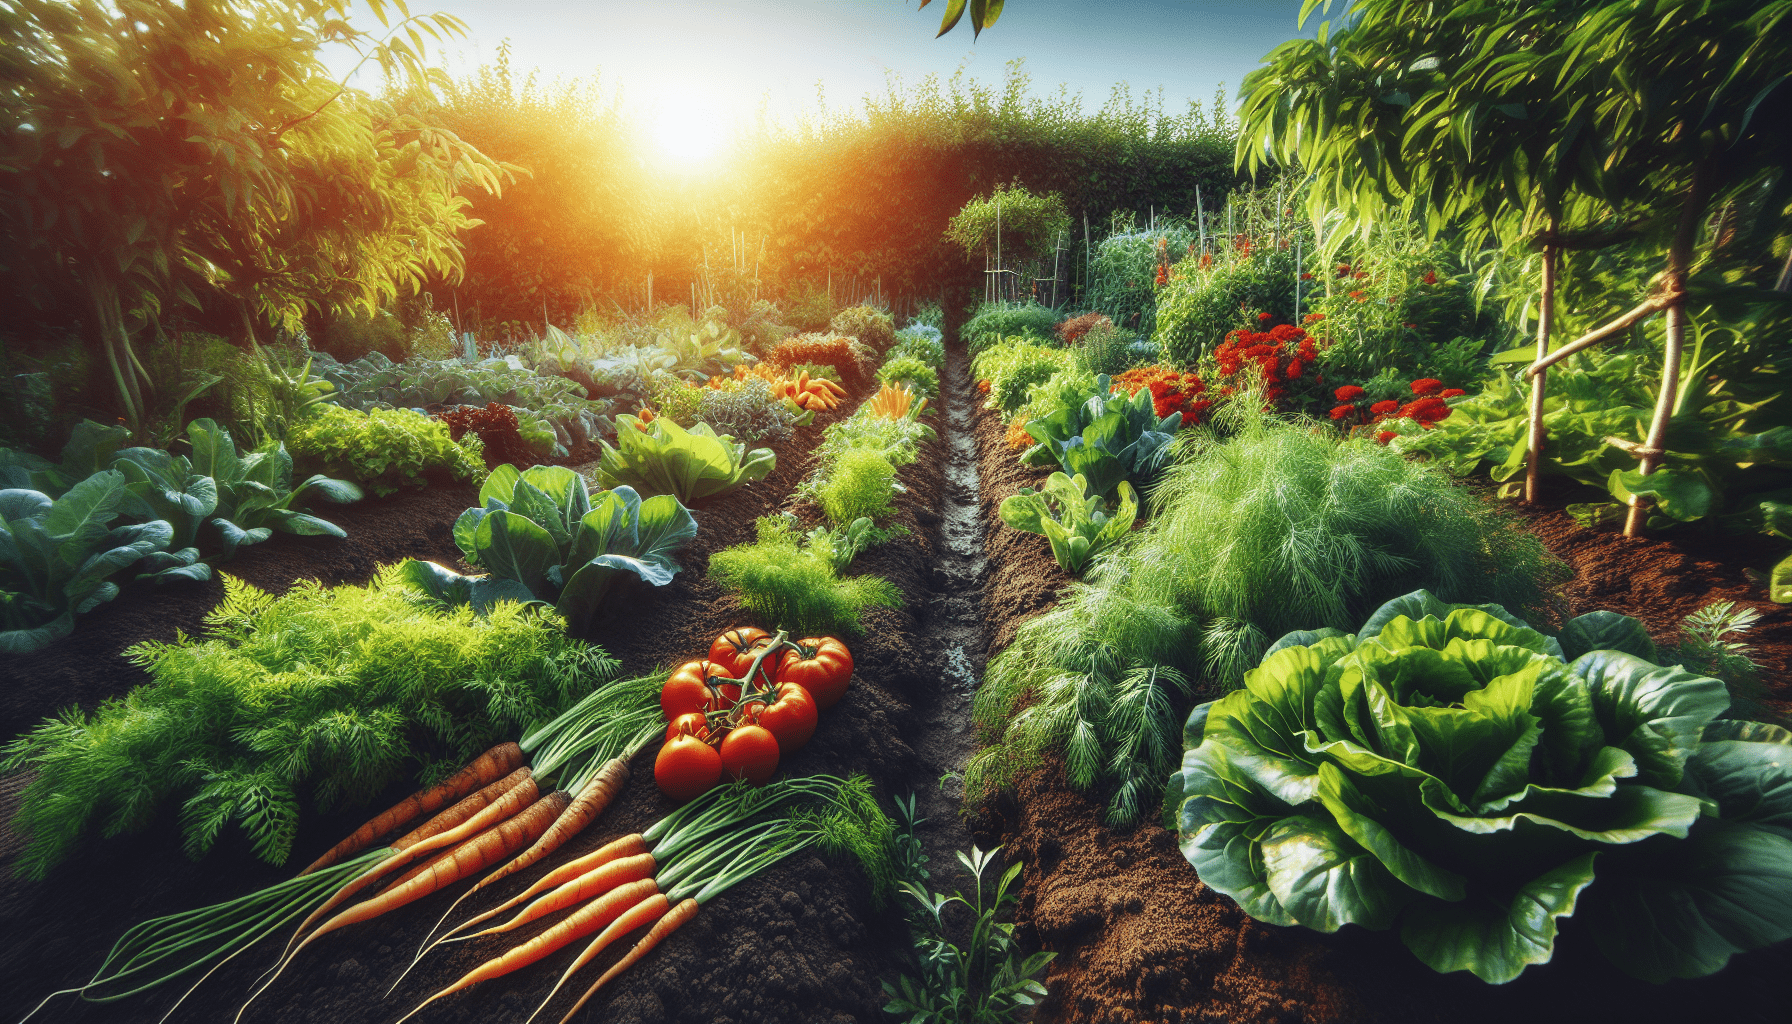 How Organic Food is Grown Naturally